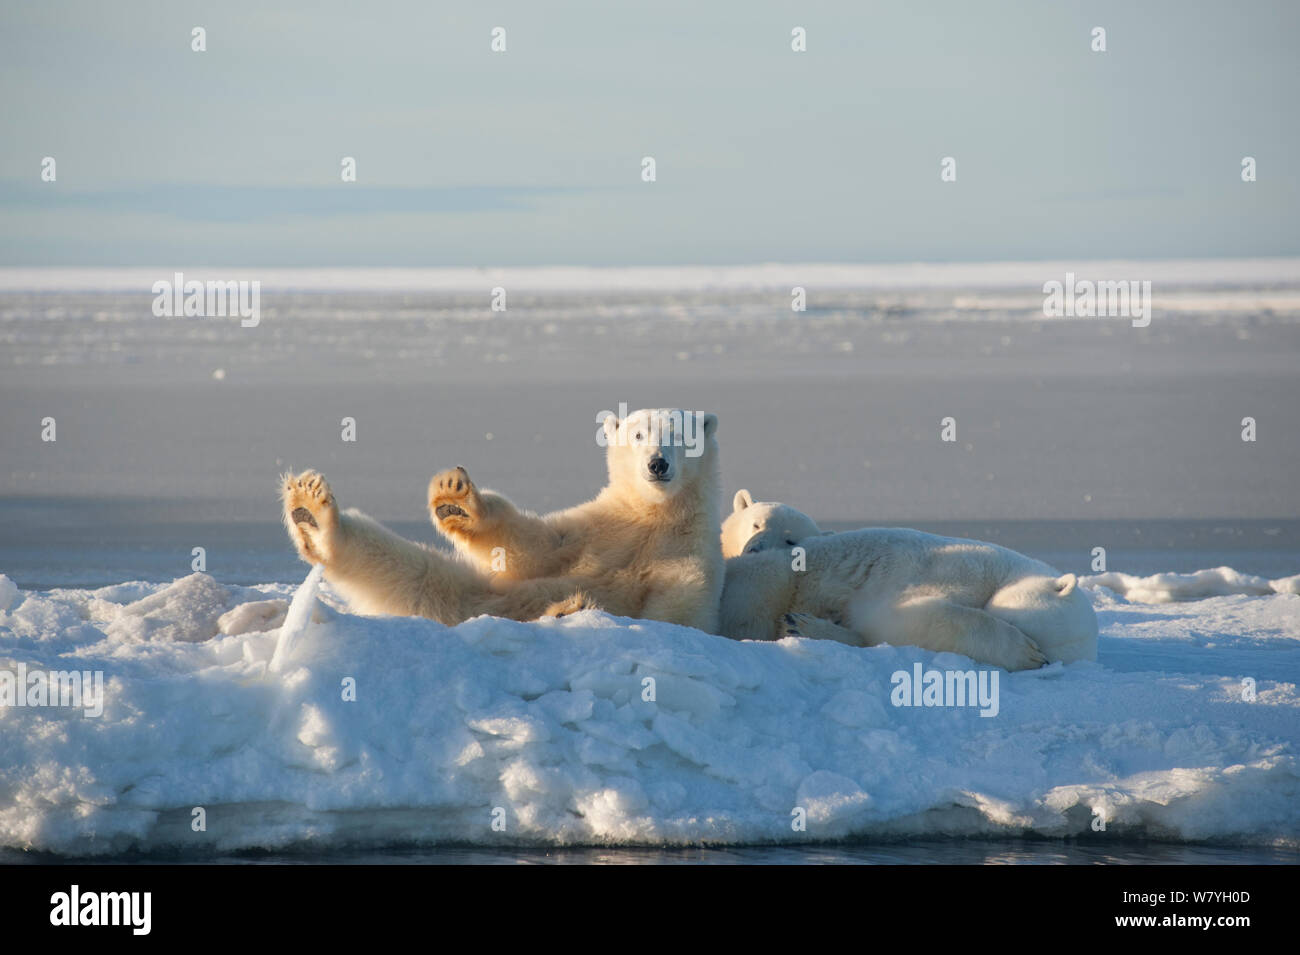 Polar bear (Ursus maritimus) sow with two juveniles resting on newly formed pack ice during autumn freeze up, Beaufort Sea, off Arctic coast, Alaska Stock Photo